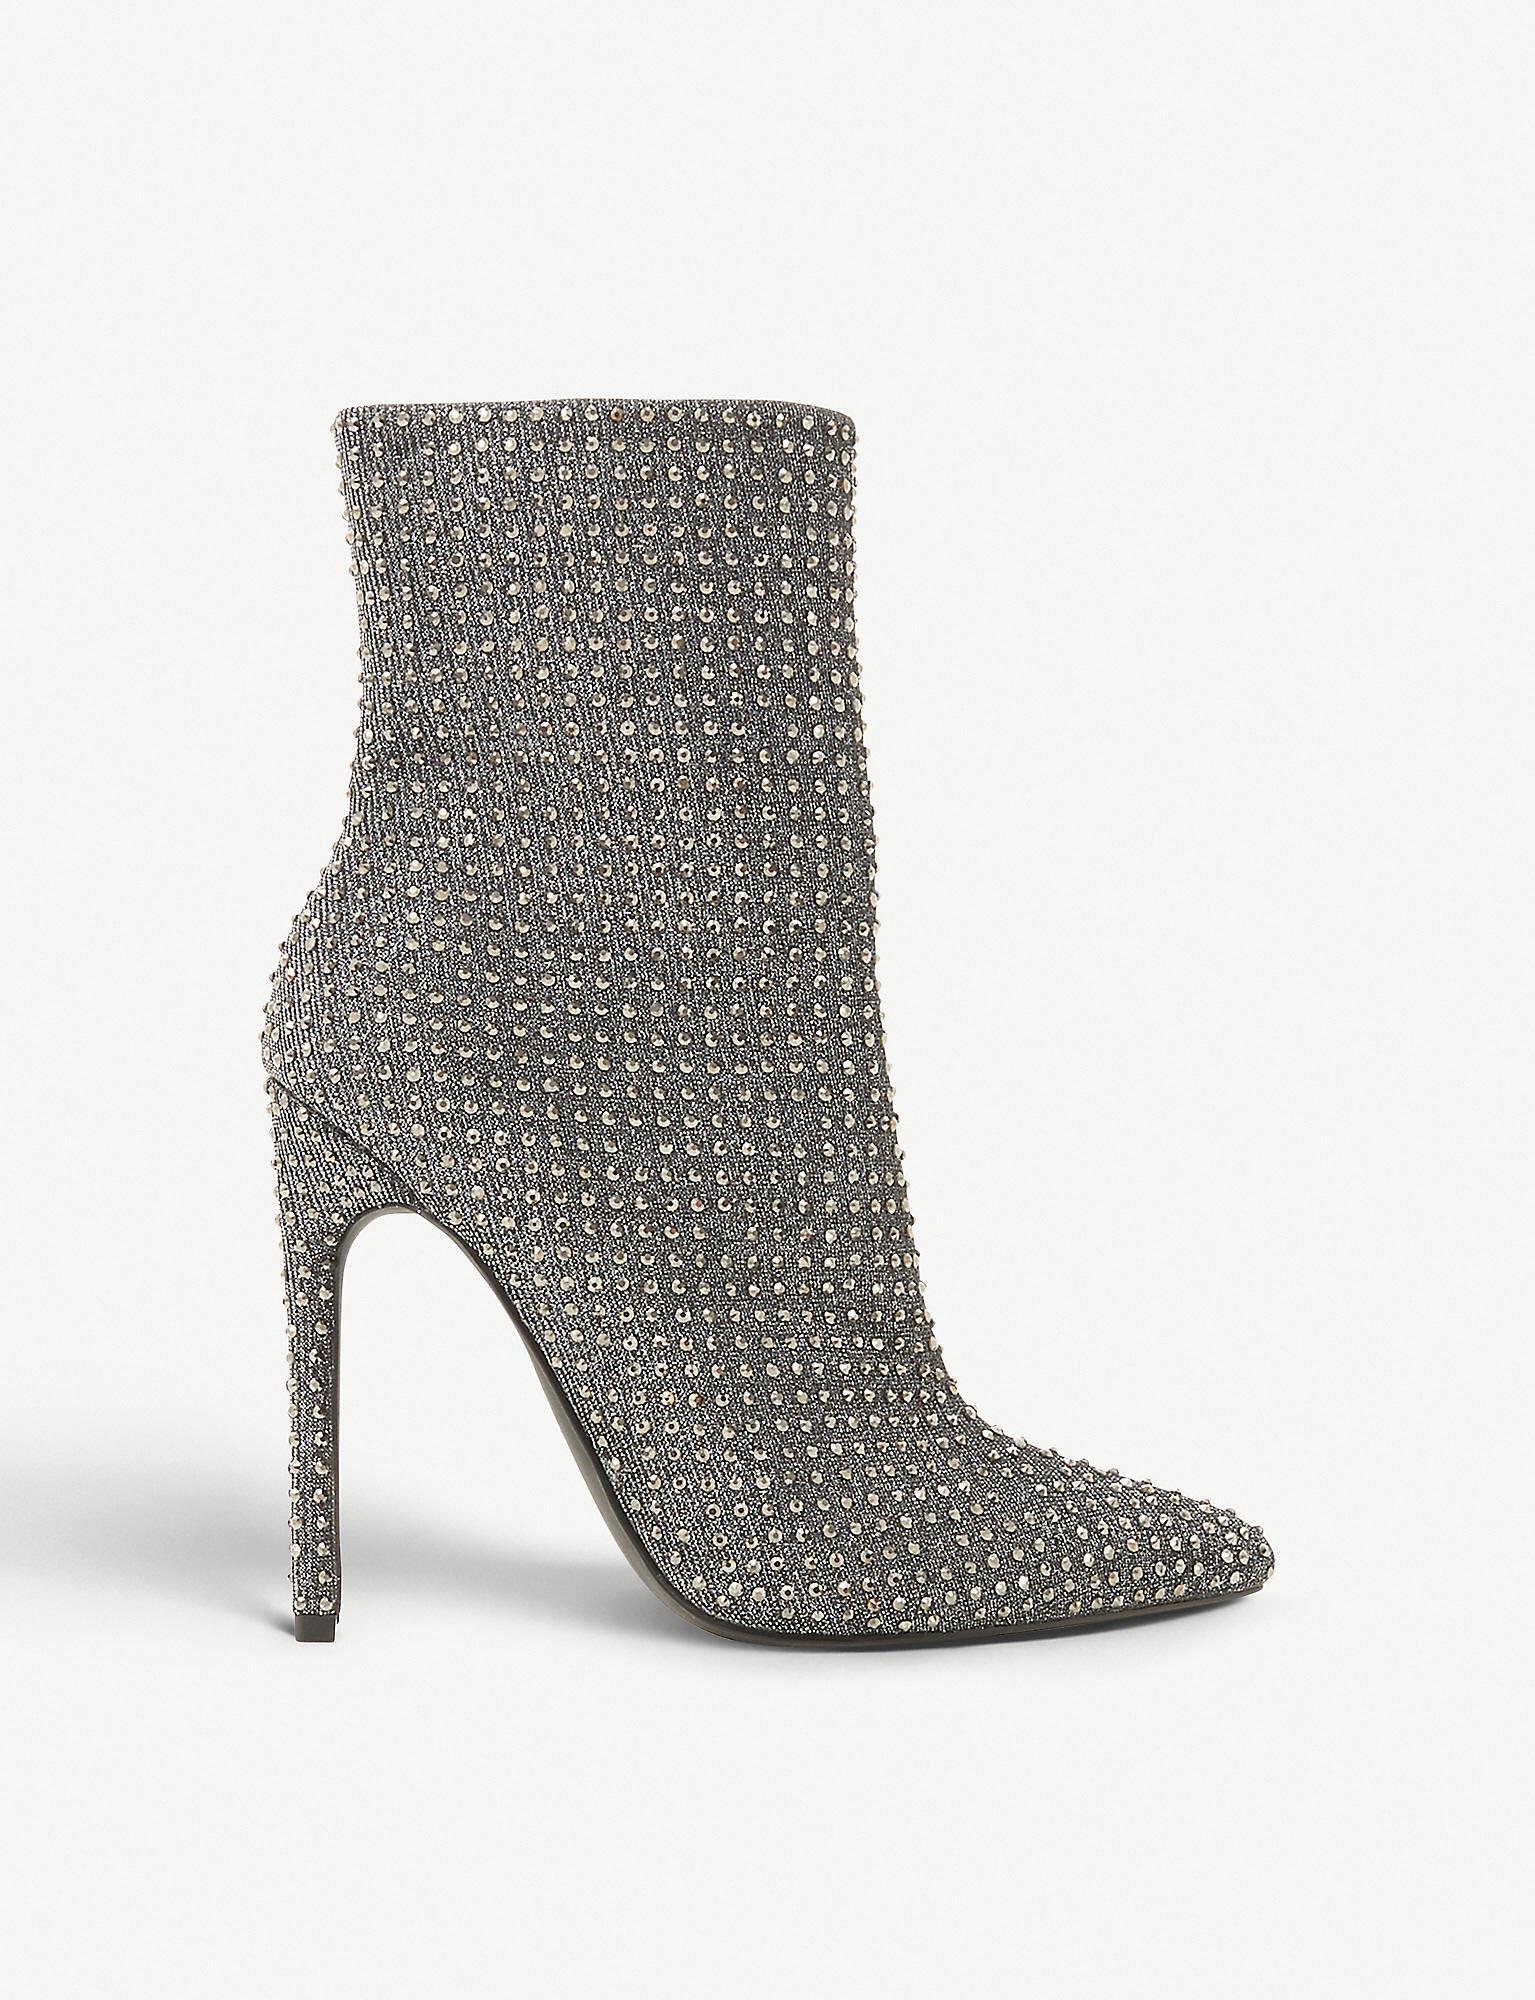 Steve Rhinestone-embellished Ankle Boots in Gray | Lyst